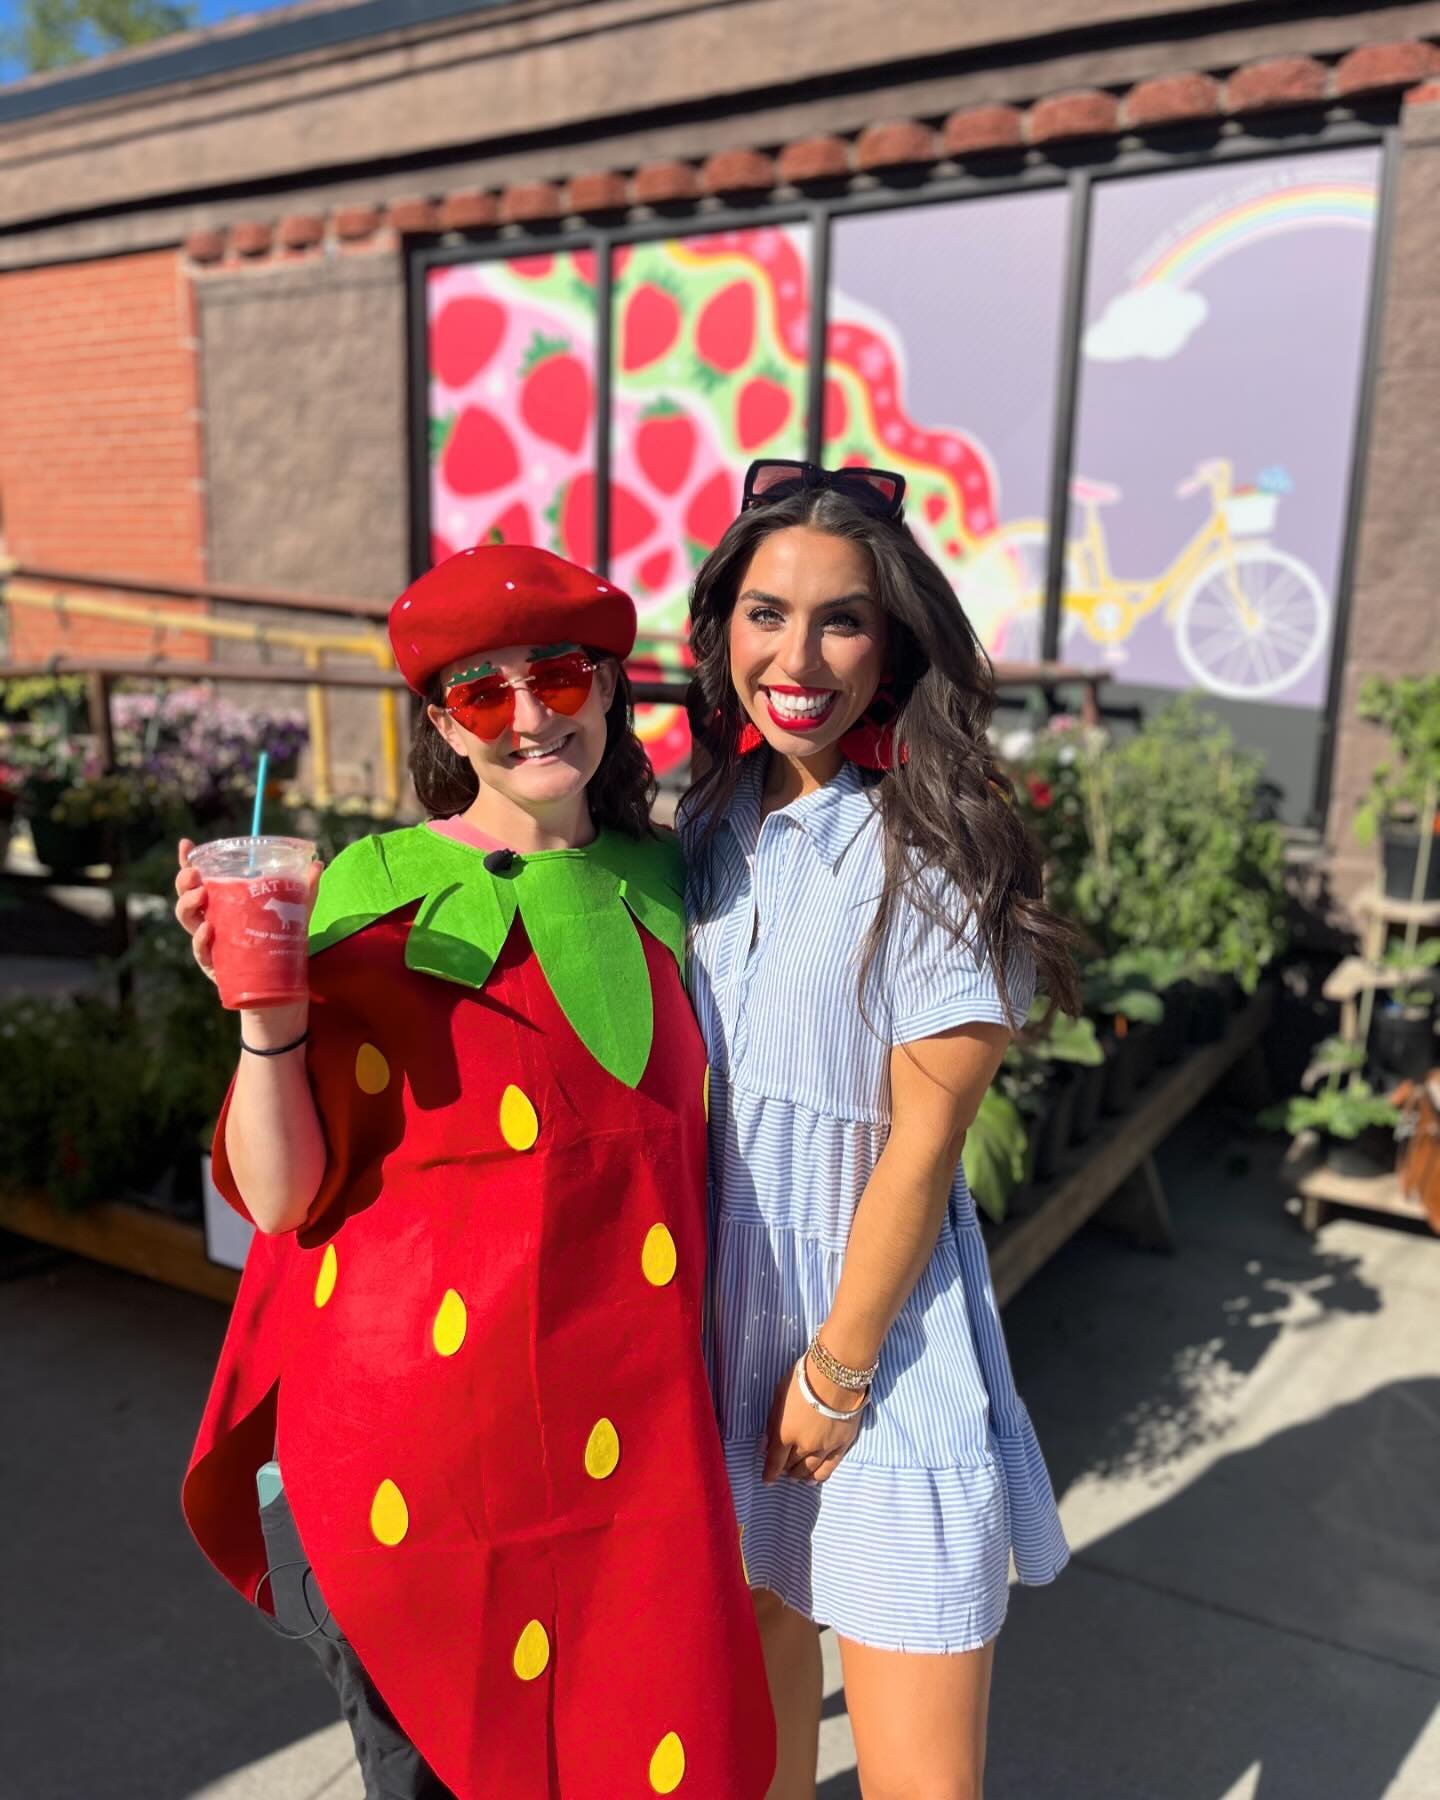 Ava from @accesscarolina_gvl is here this morning gushing over all the strawberry happiness we got at the Swamp! And we don&rsquo;t blame her, I mean look at this stuff. Tune in or even better, put on your best strawberry costume and come hang with u